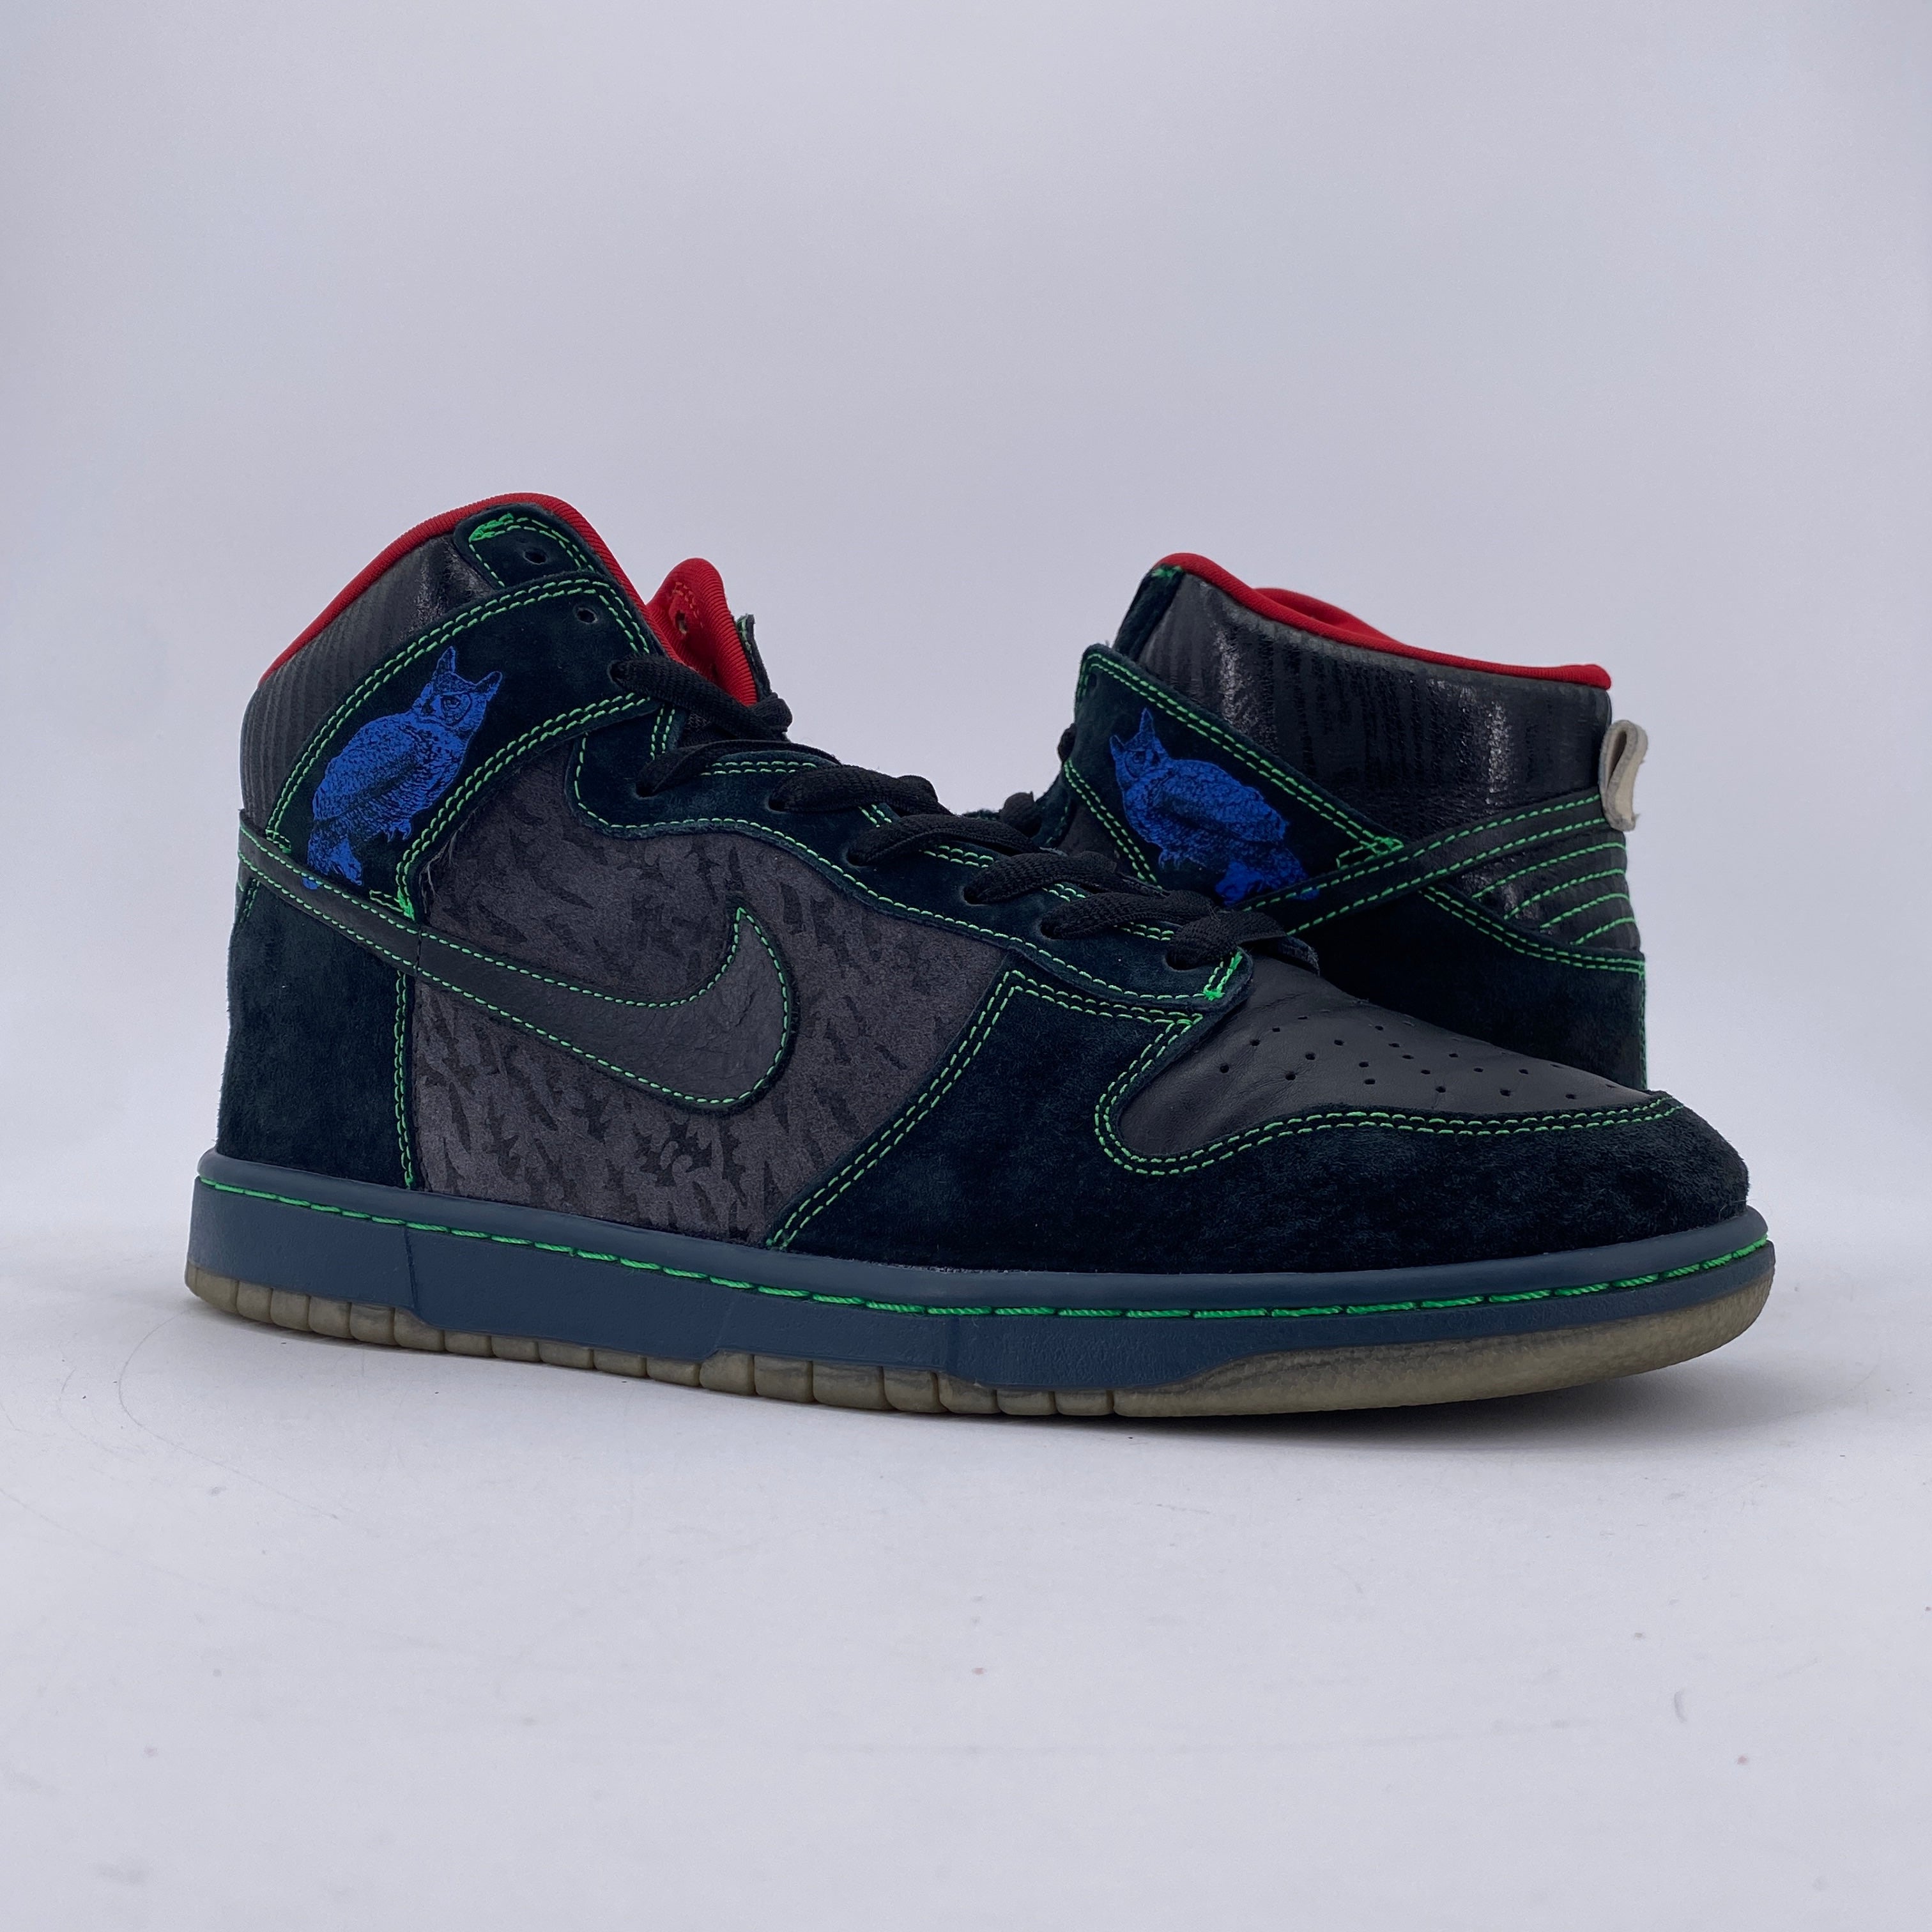 Nike SB Dunk High &quot;Twin Peaks&quot; 2009 Used Size 11.5